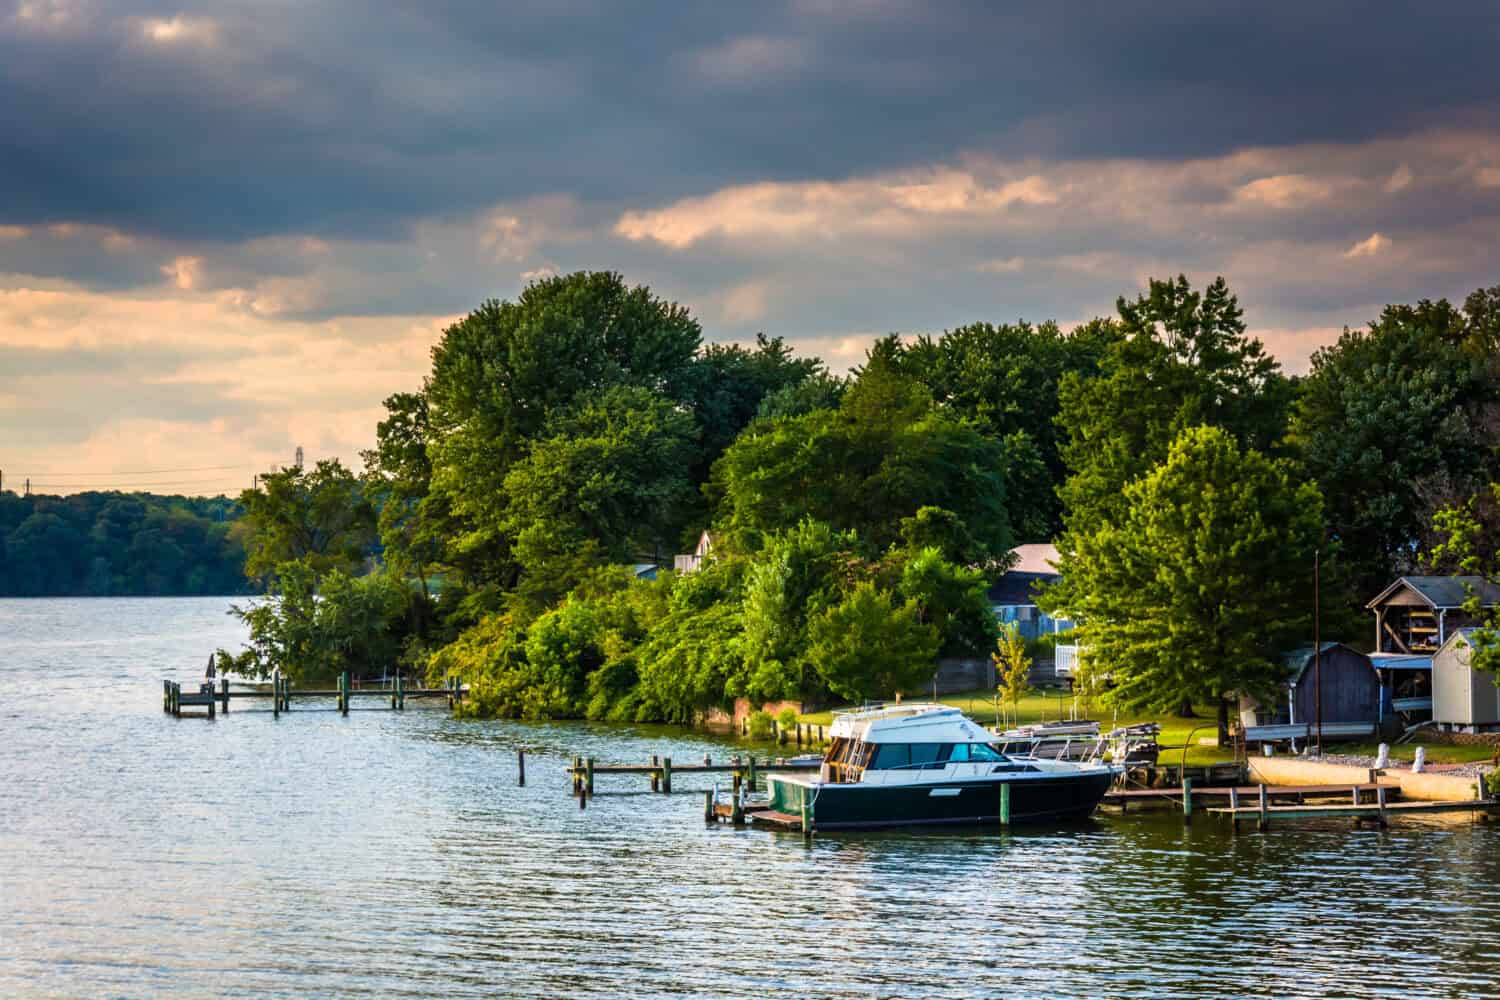 Boats and docks along the Back River in Essex, Maryland.